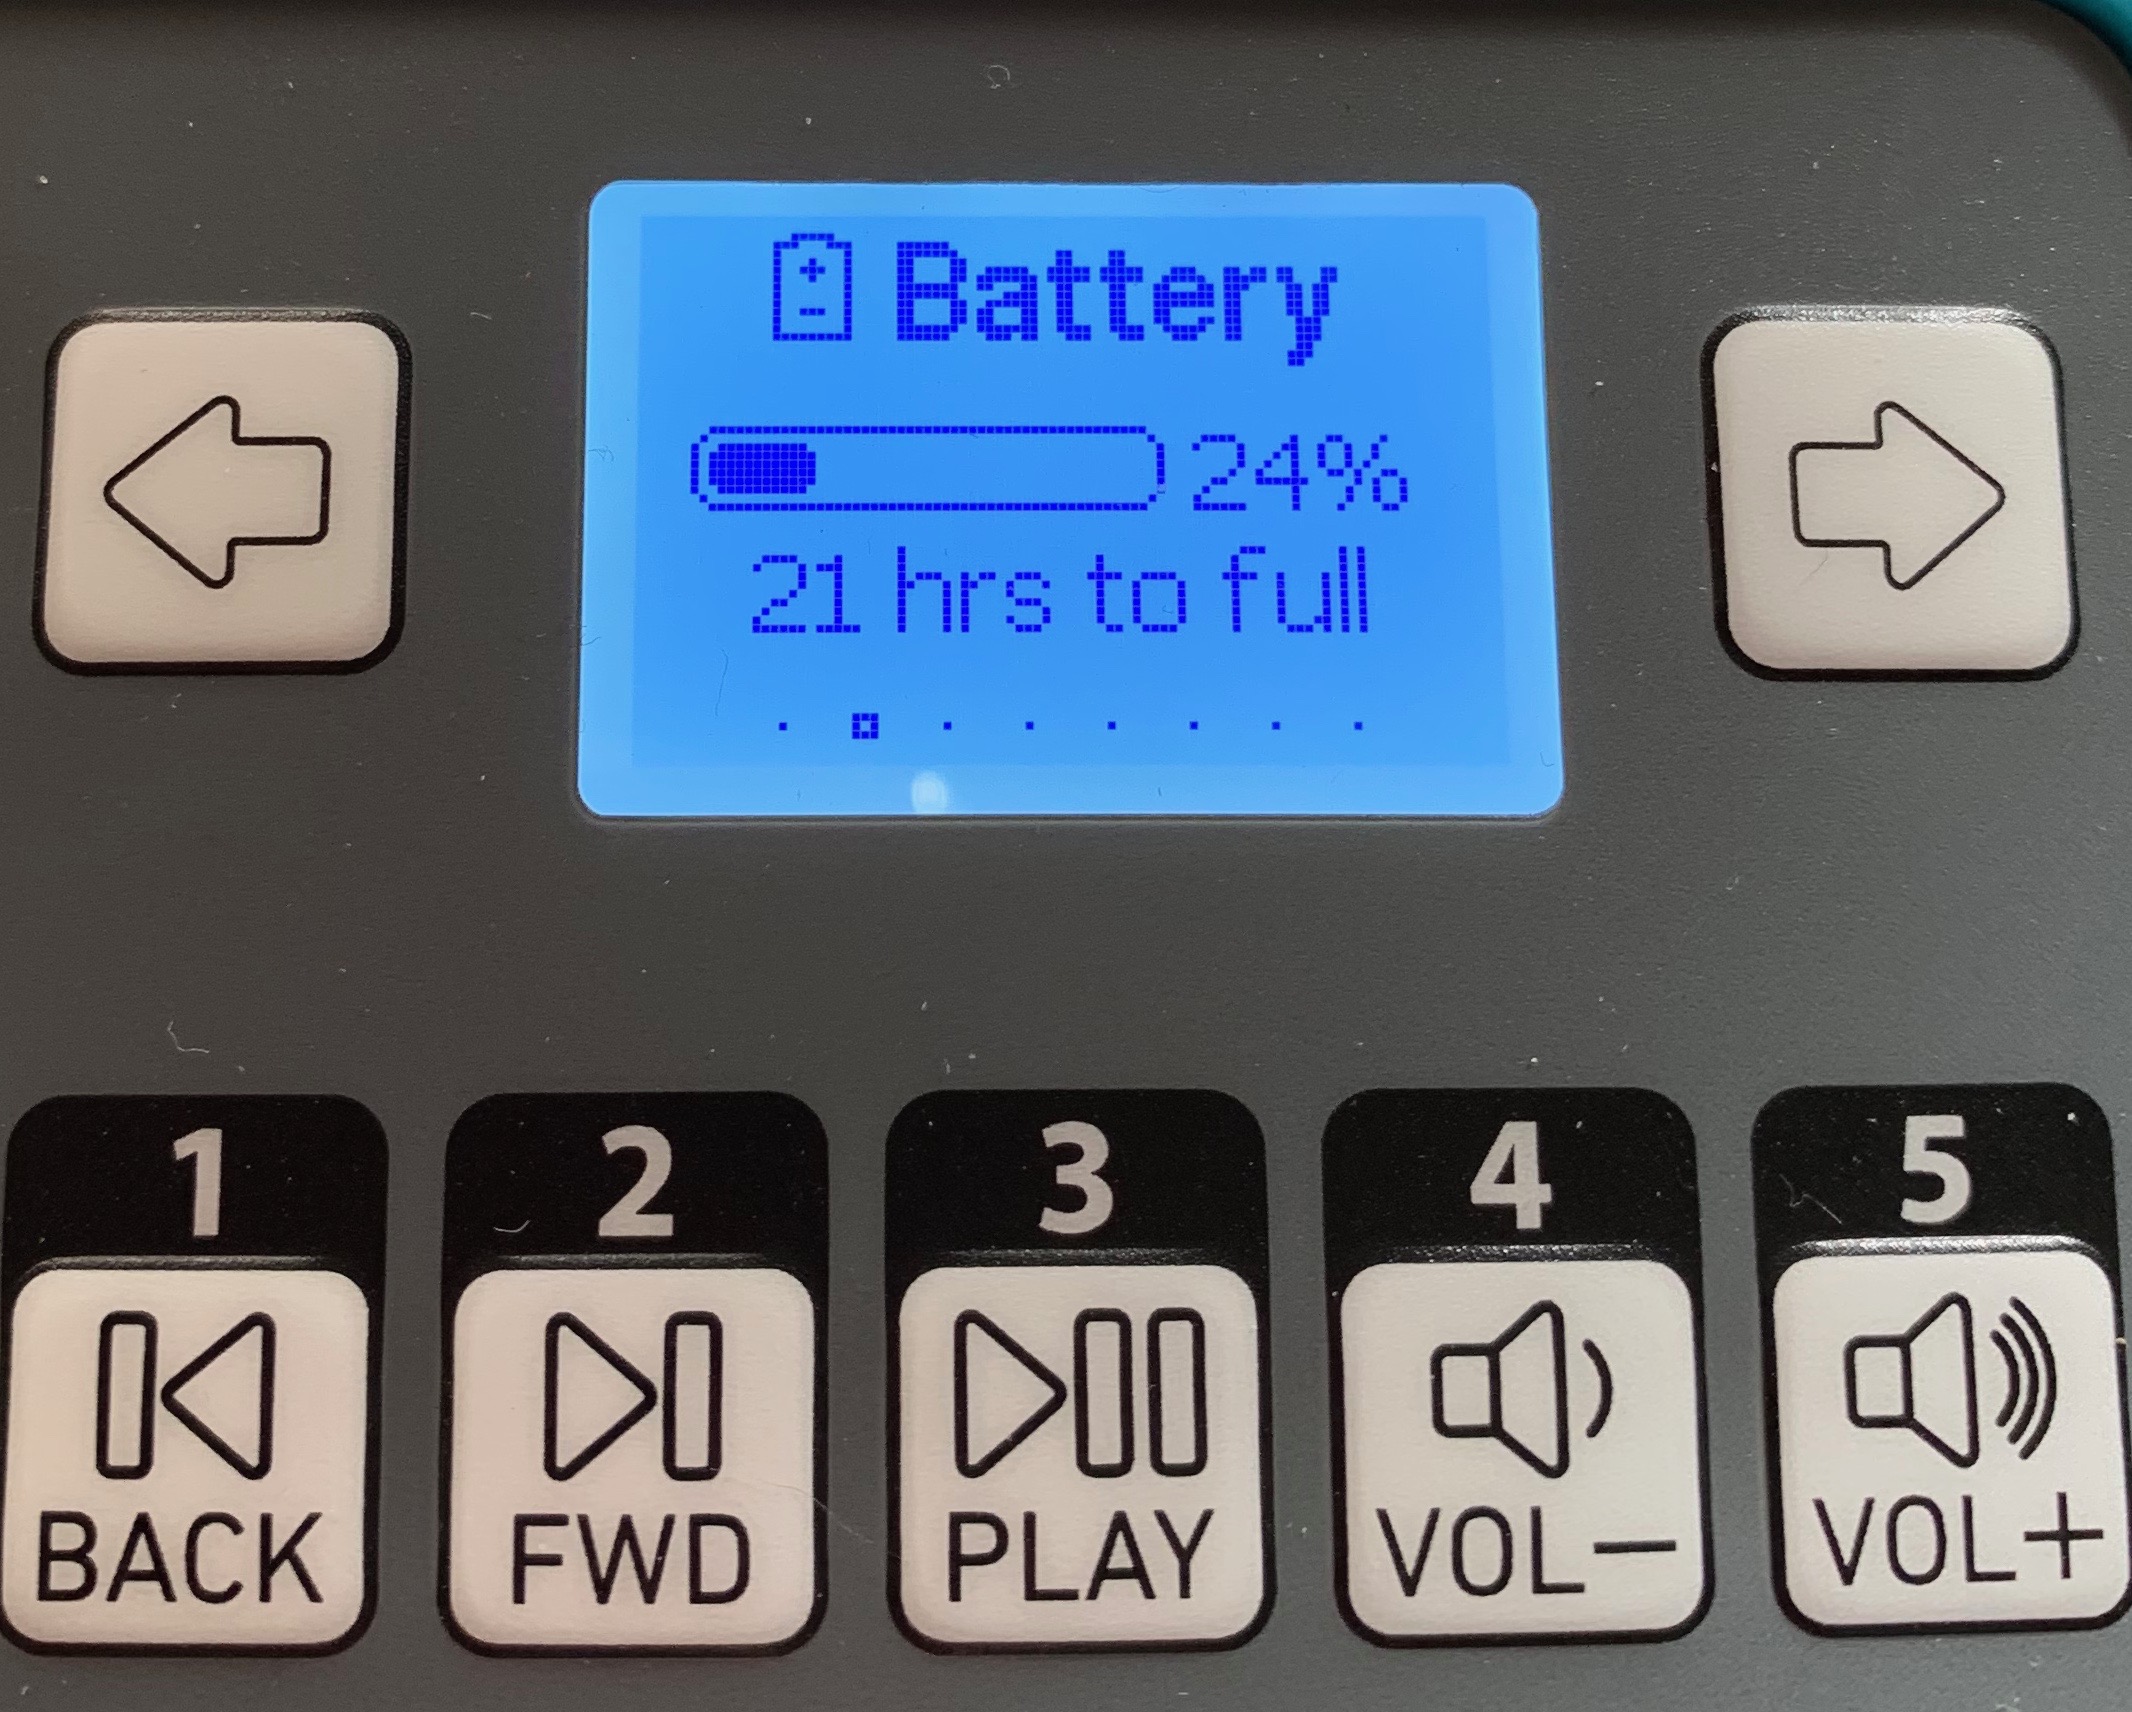 SolarHome screen displaying battery 24% charged